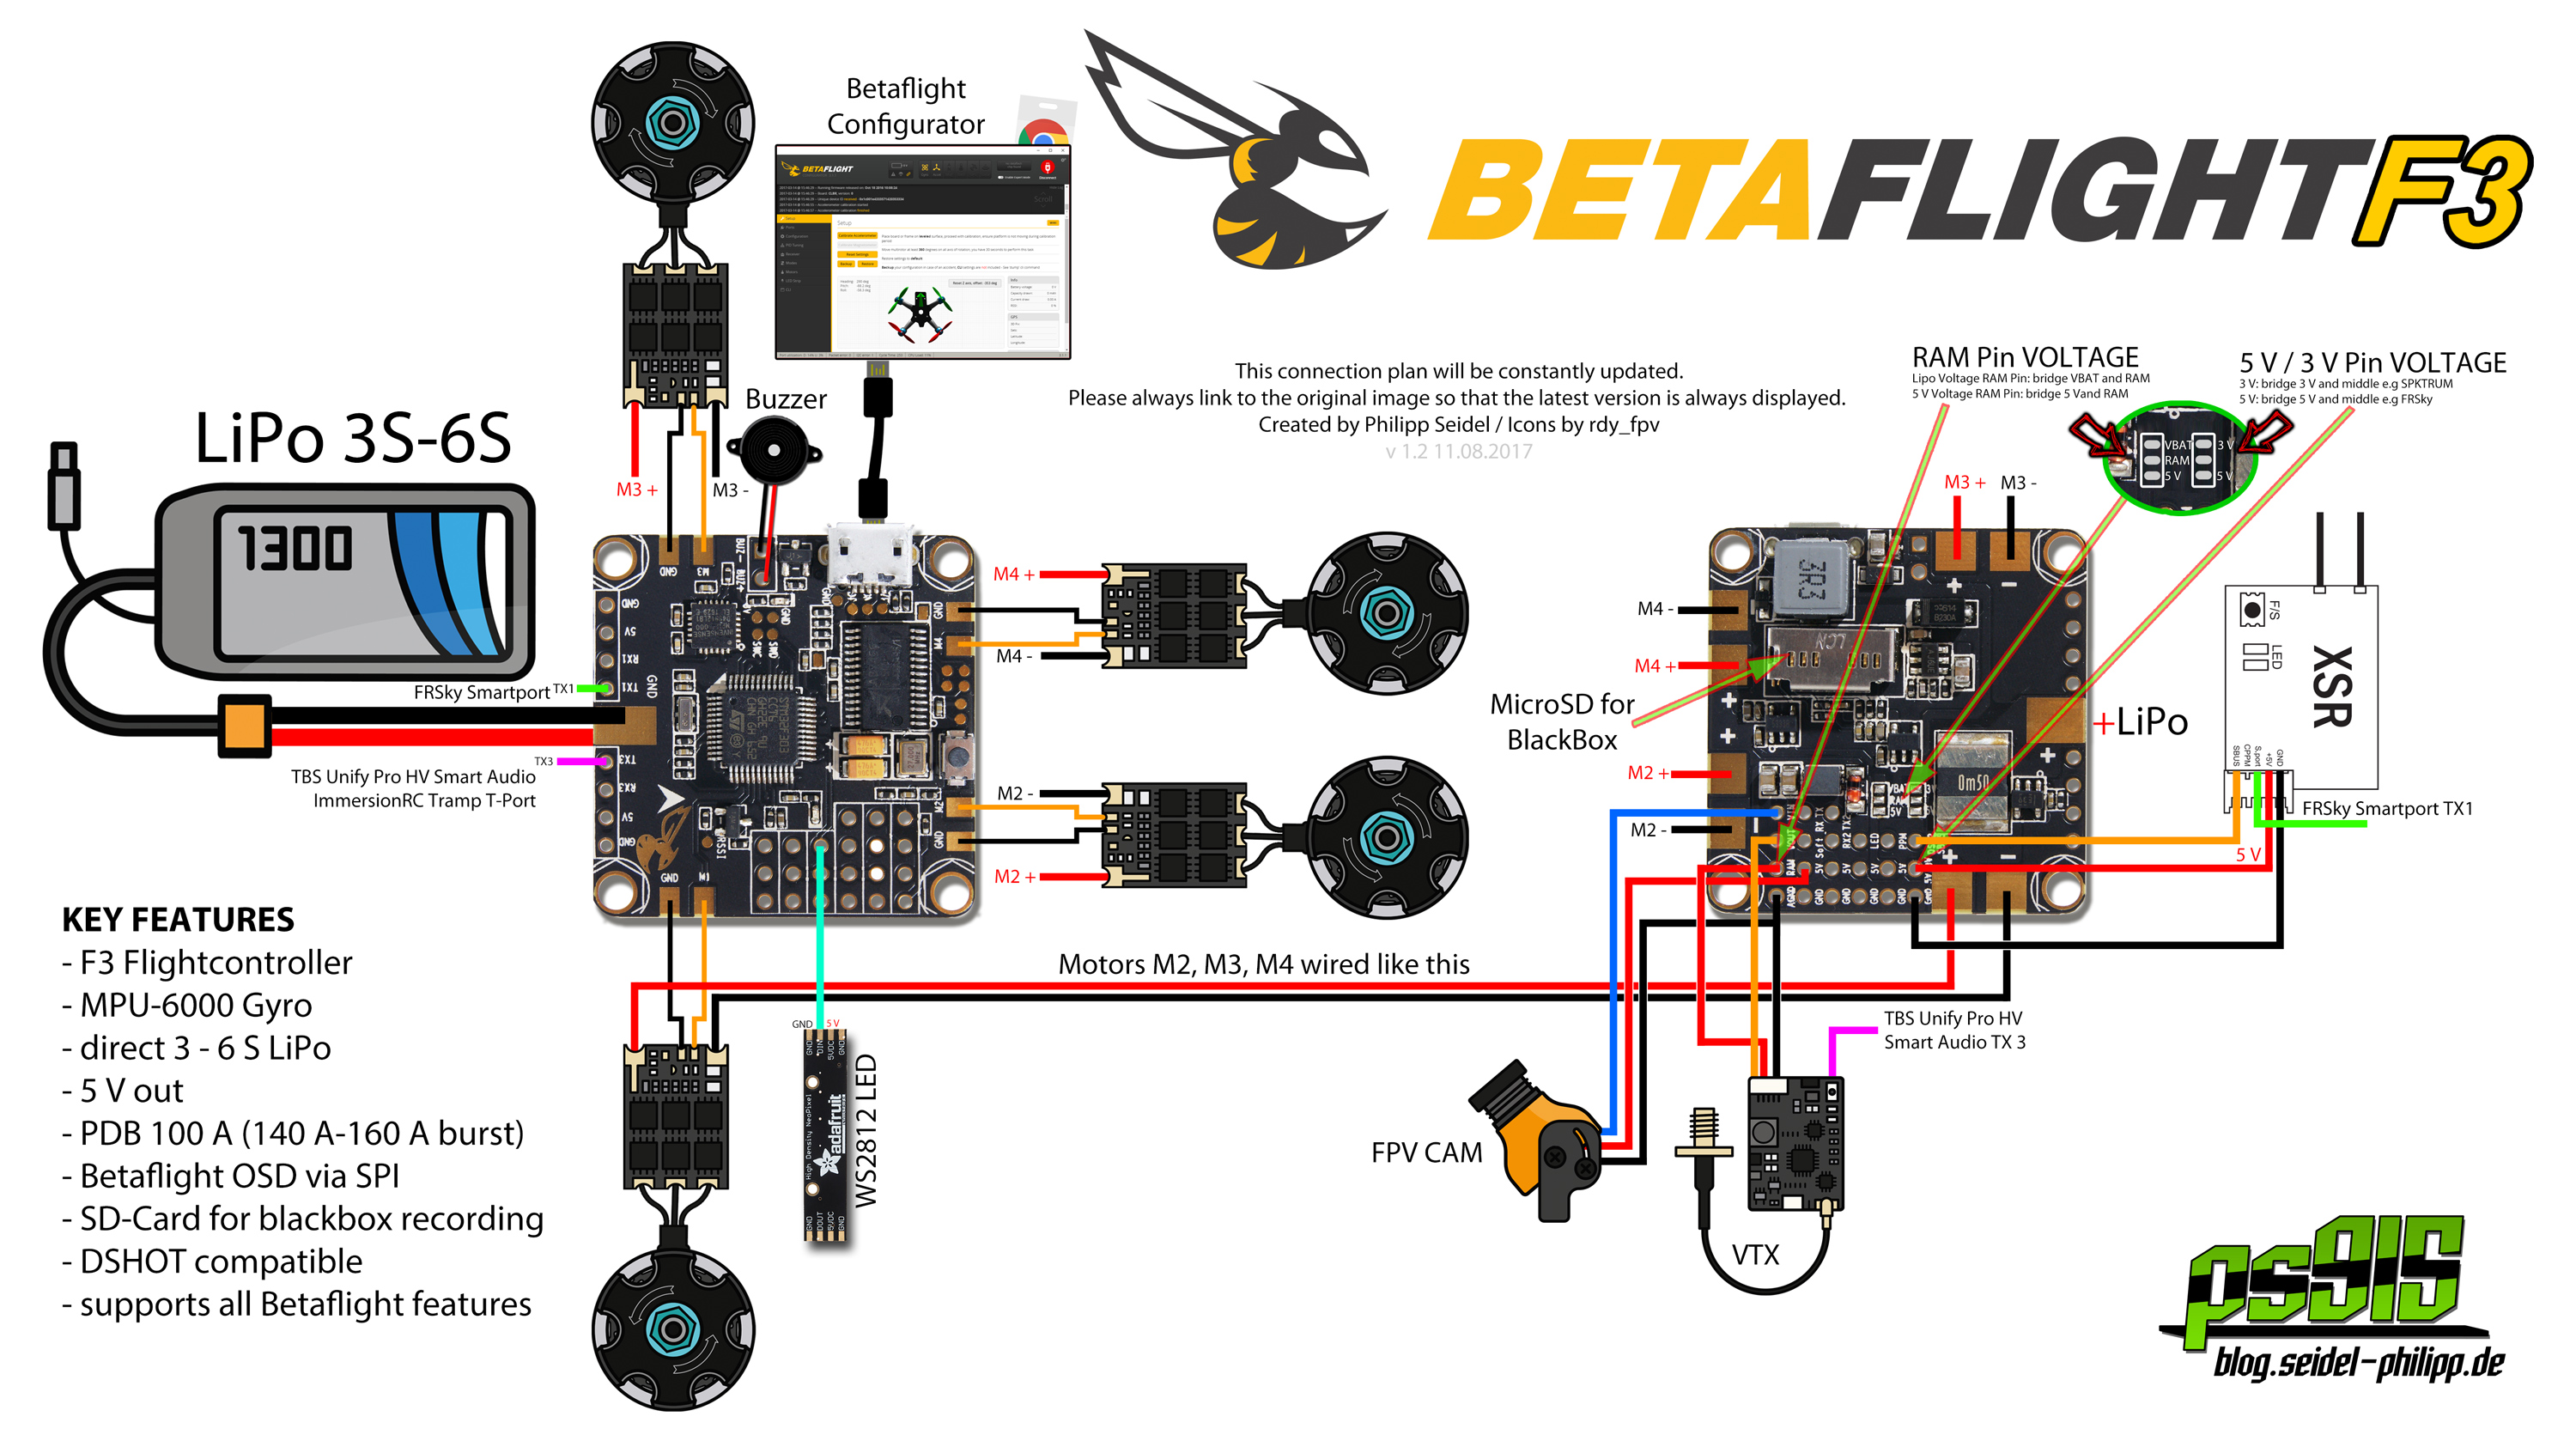 I can't get my sticks to register movement. Do you have a Betaflight f3